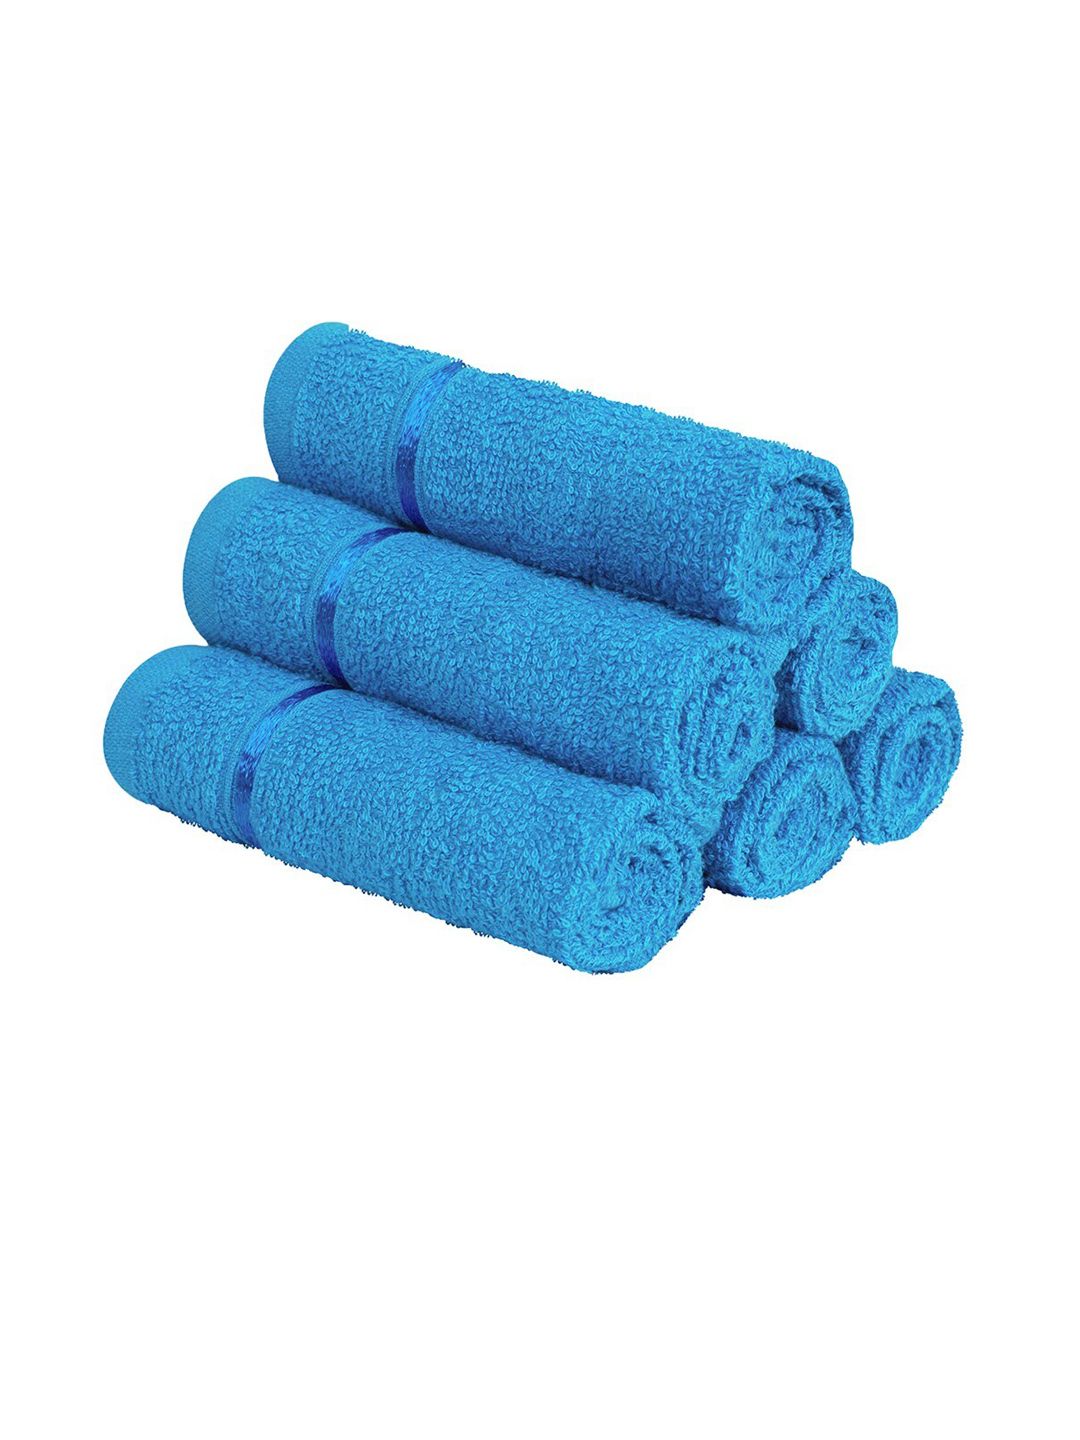 Story@home Set Of 4 Blue Solid Pure Cotton 450 GSM Face Towels Price in India